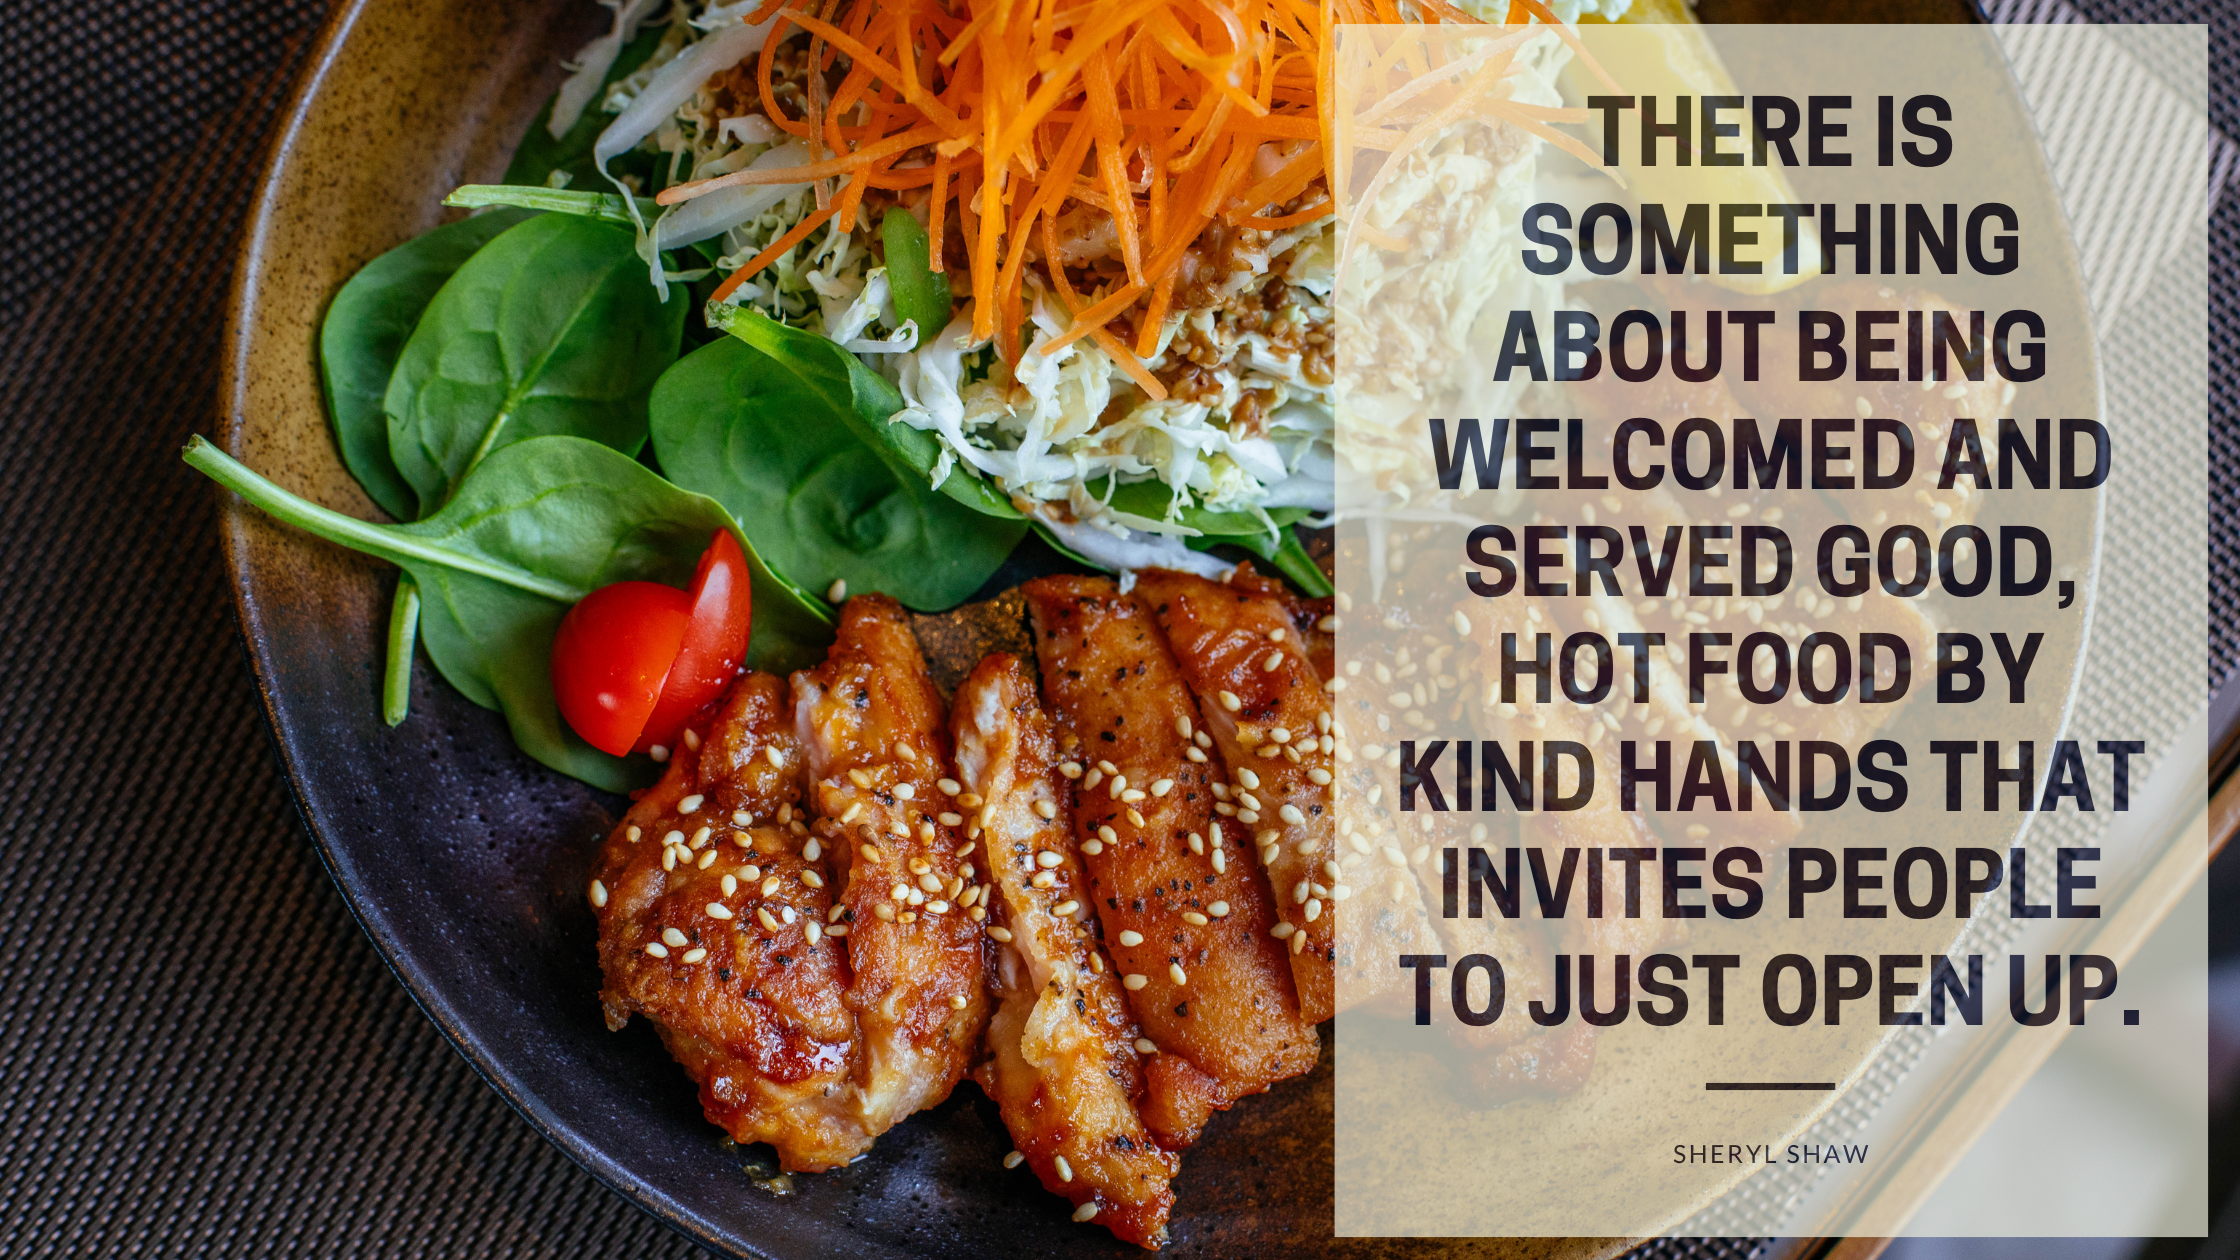 There is something about being welcomed and served good, hot food by kind hands that invites people to just open up